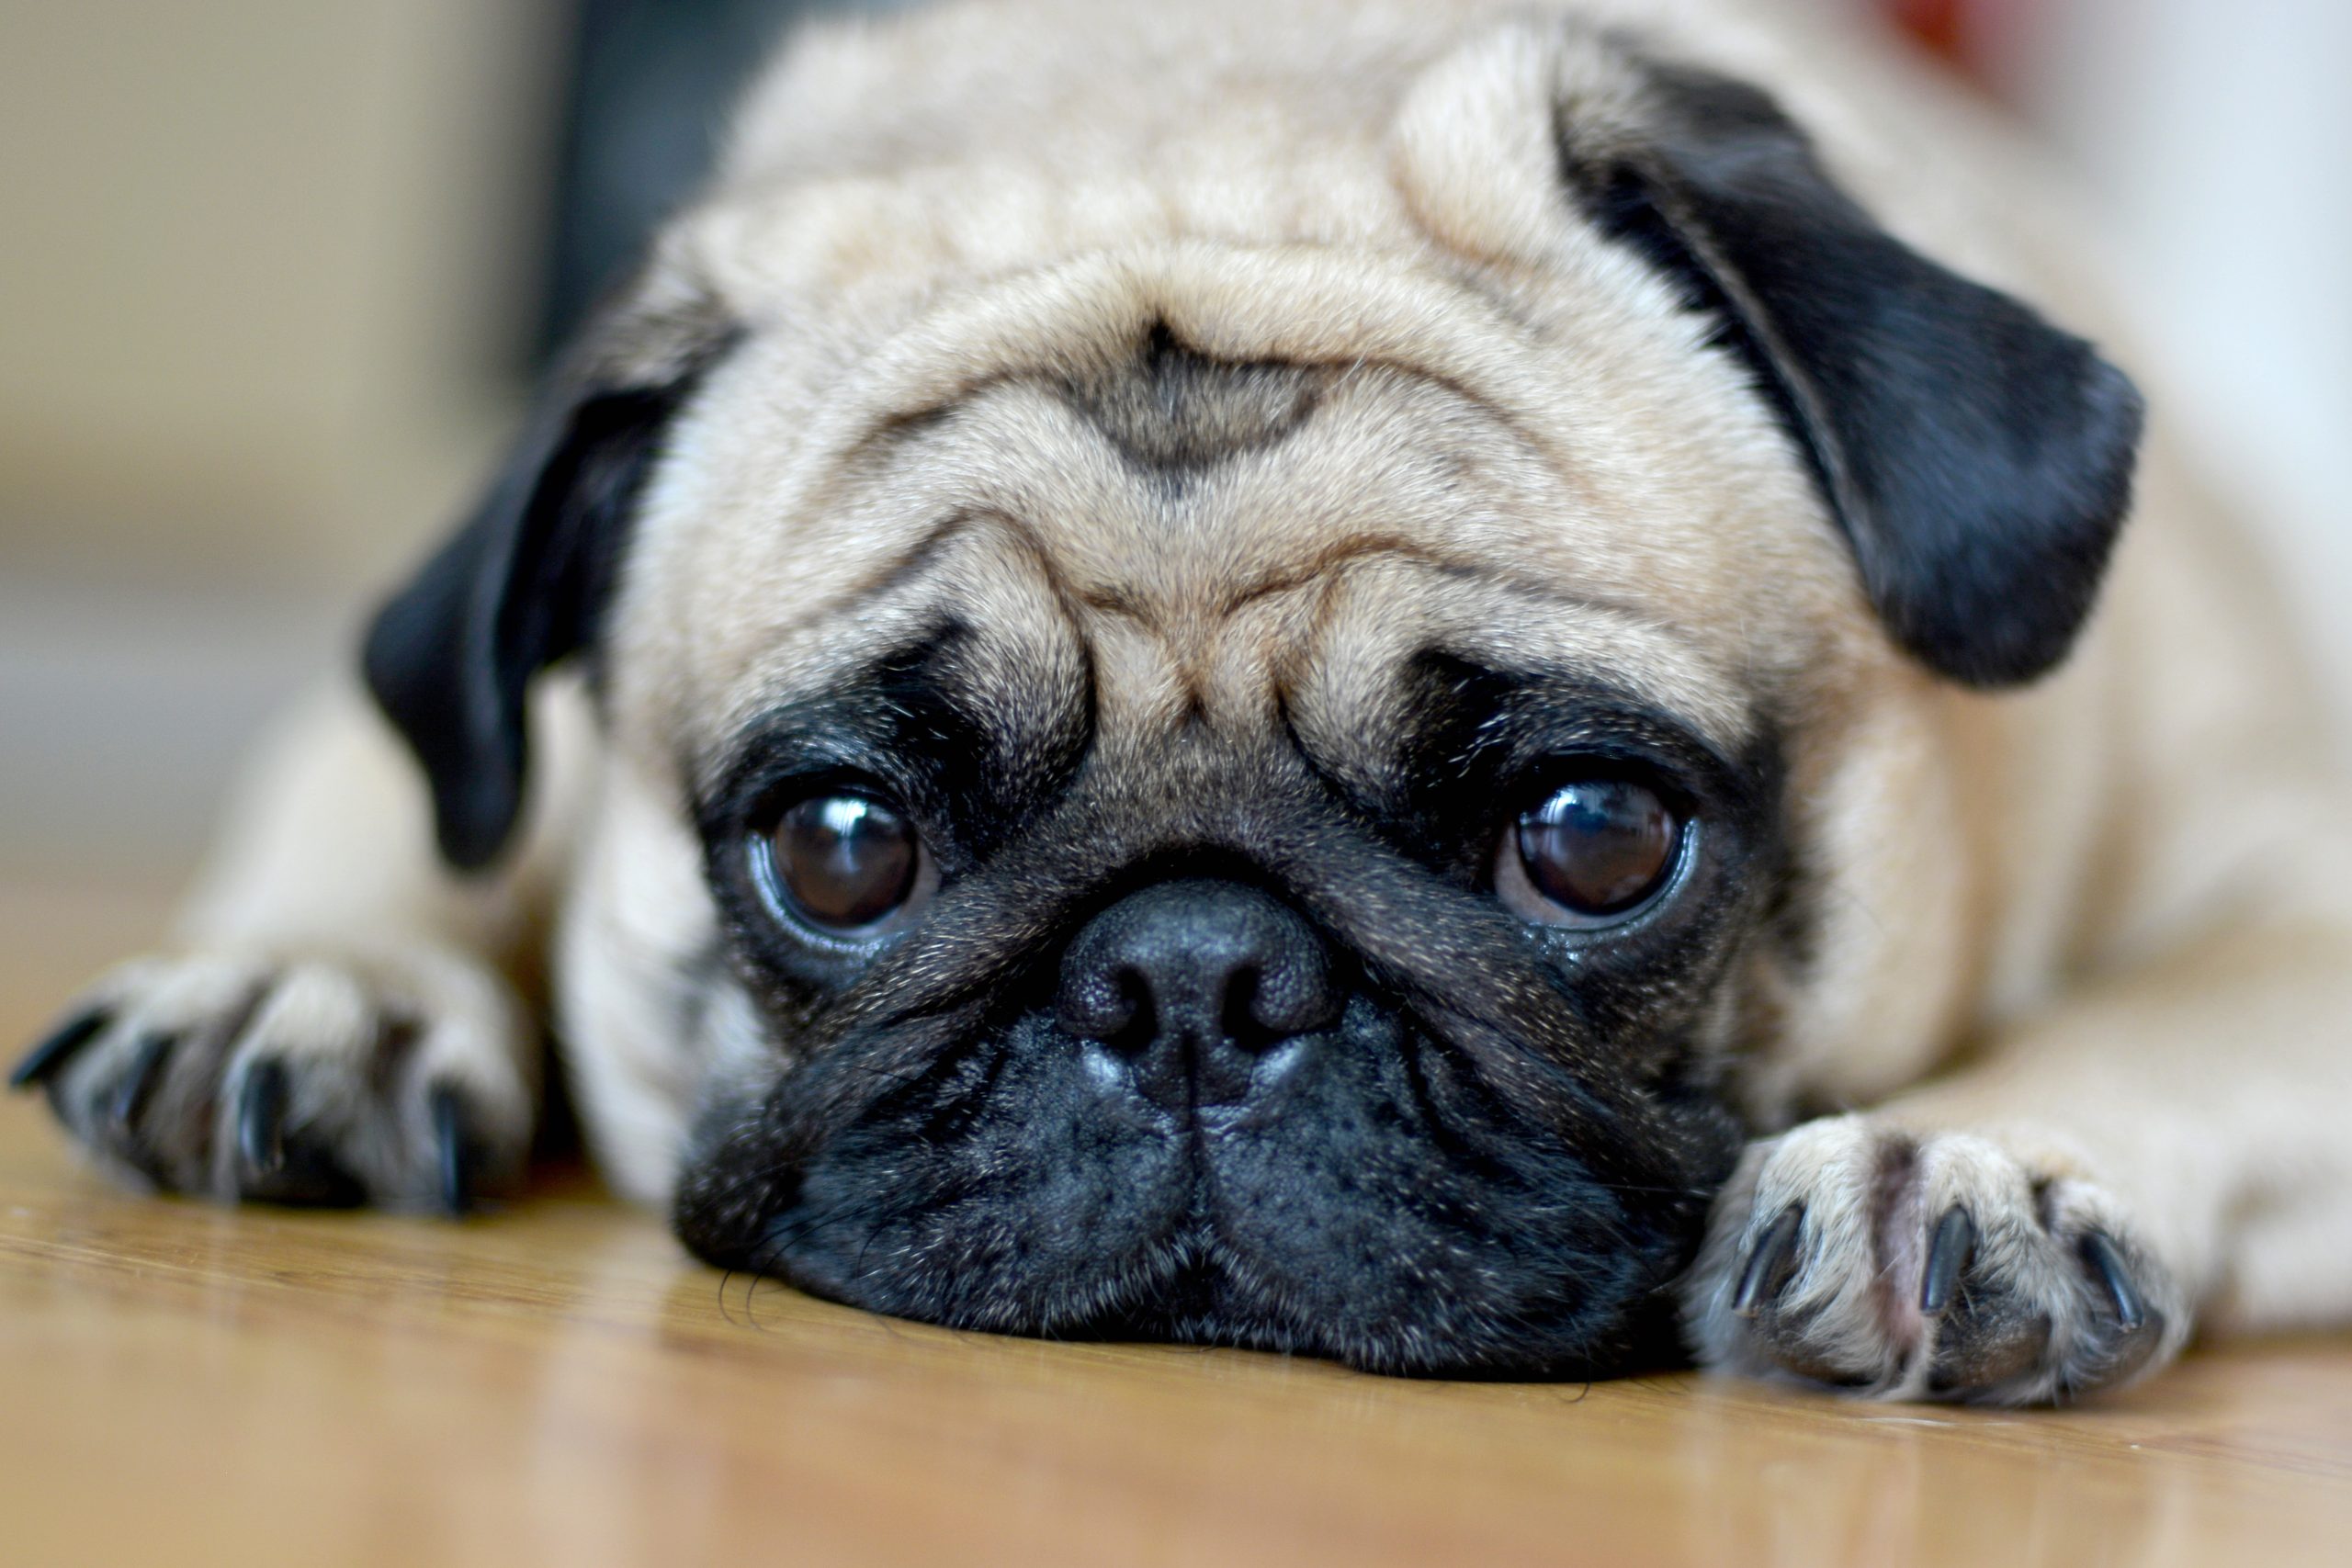 Pug health so poor it ‘can’t be considered a typical dog’